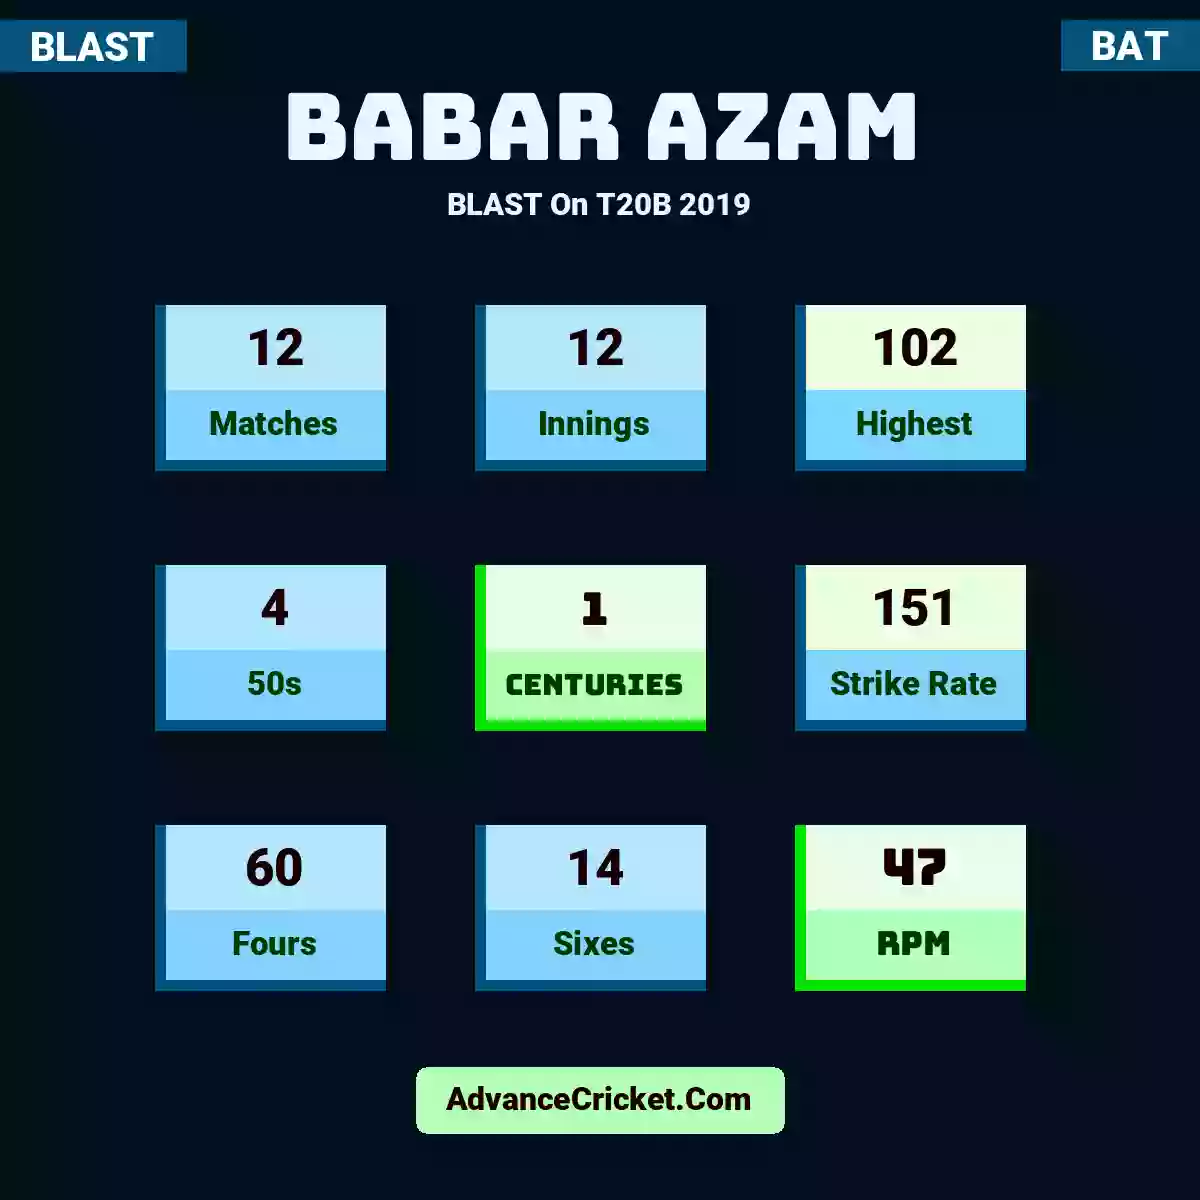 Babar Azam BLAST  On T20B 2019, Babar Azam played 12 matches, scored 102 runs as highest, 4 half-centuries, and 1 centuries, with a strike rate of 151. B.Azam hit 60 fours and 14 sixes, with an RPM of 47.